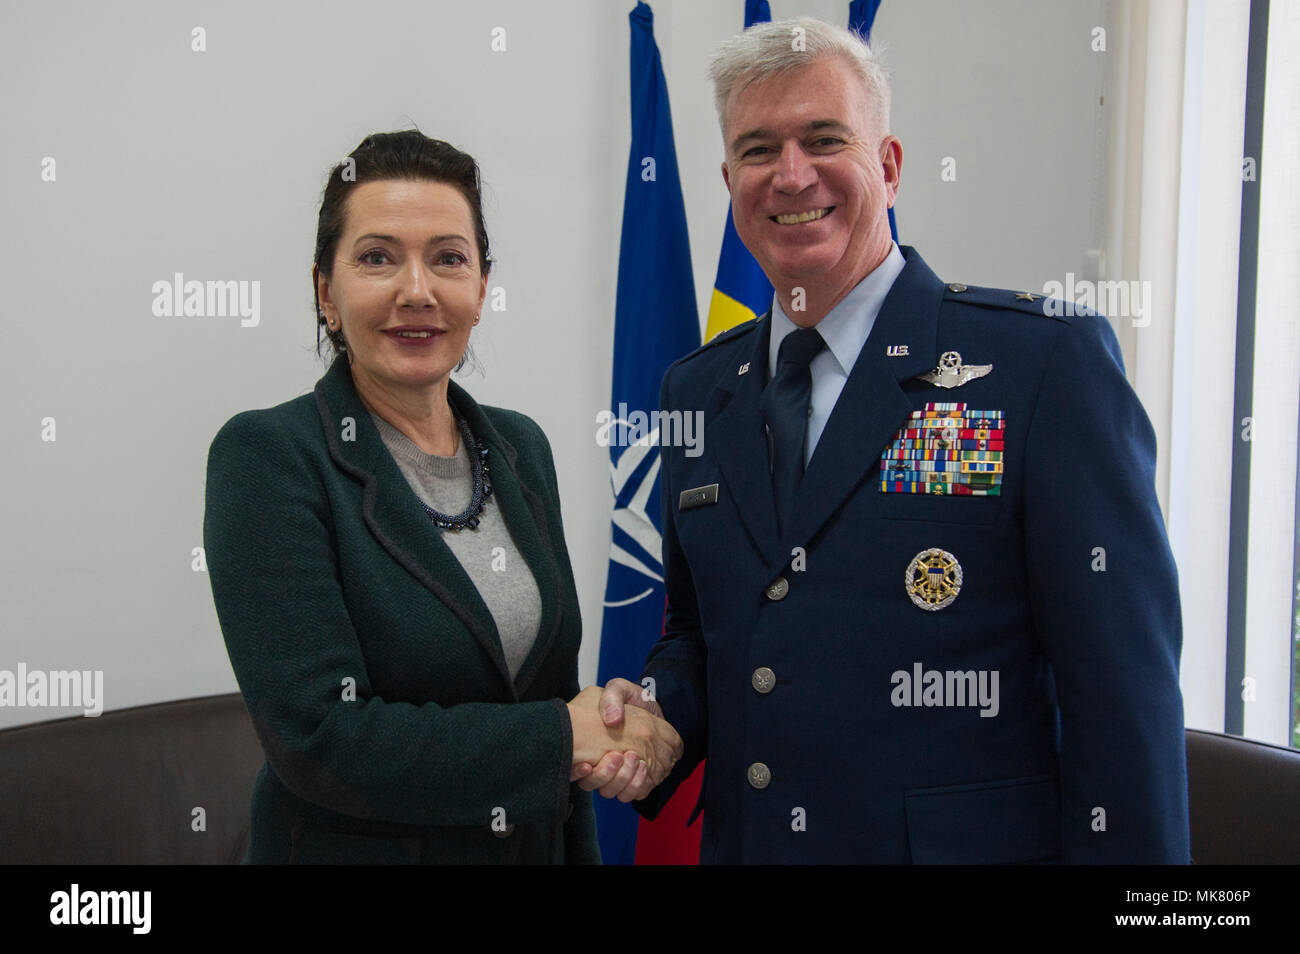 U.S. Air Force Brig. Gen. Robert Huston, NATO Headquarters Sarajevo commander, met with Mrs Dana-Manuela Constantinescu, Ambassador of Romania to Bosnia and Herzegovina Nov. 24, 2017 2017 at the Romanian Embassy in Sarajevo, BiH. Huston expressed appreciation for the assistance Romania provides to the country and NATO’s commitment to protecting and supporting all citizens of BiH. (U.S. Air Force photo by Staff Sgt. Amber Sorsek) Stock Photo